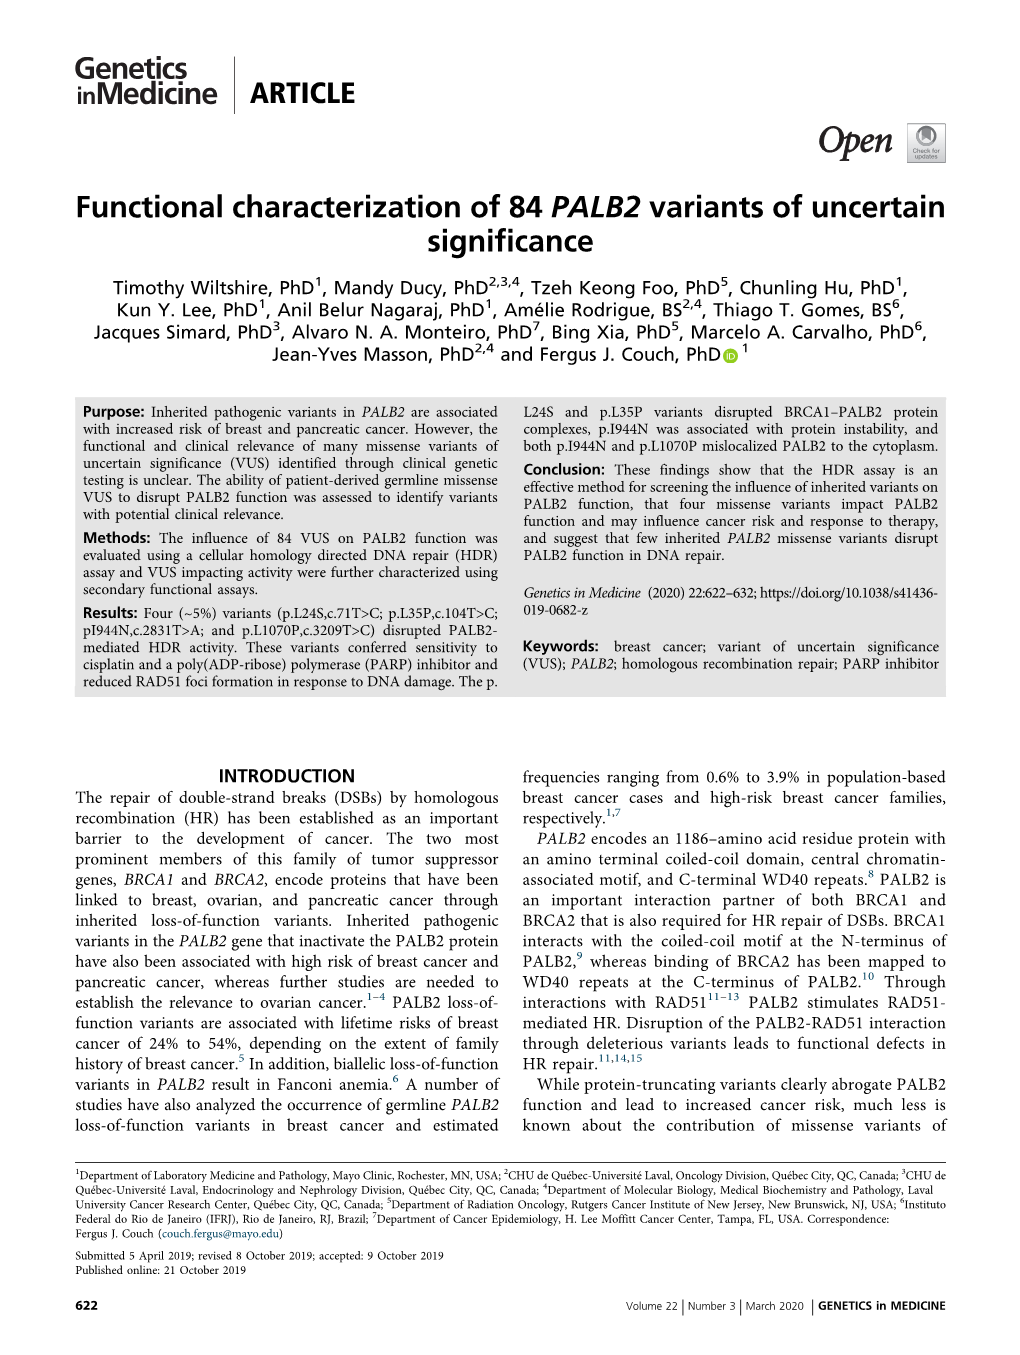 Functional Characterization of 84 PALB2 Variants of Uncertain Significance